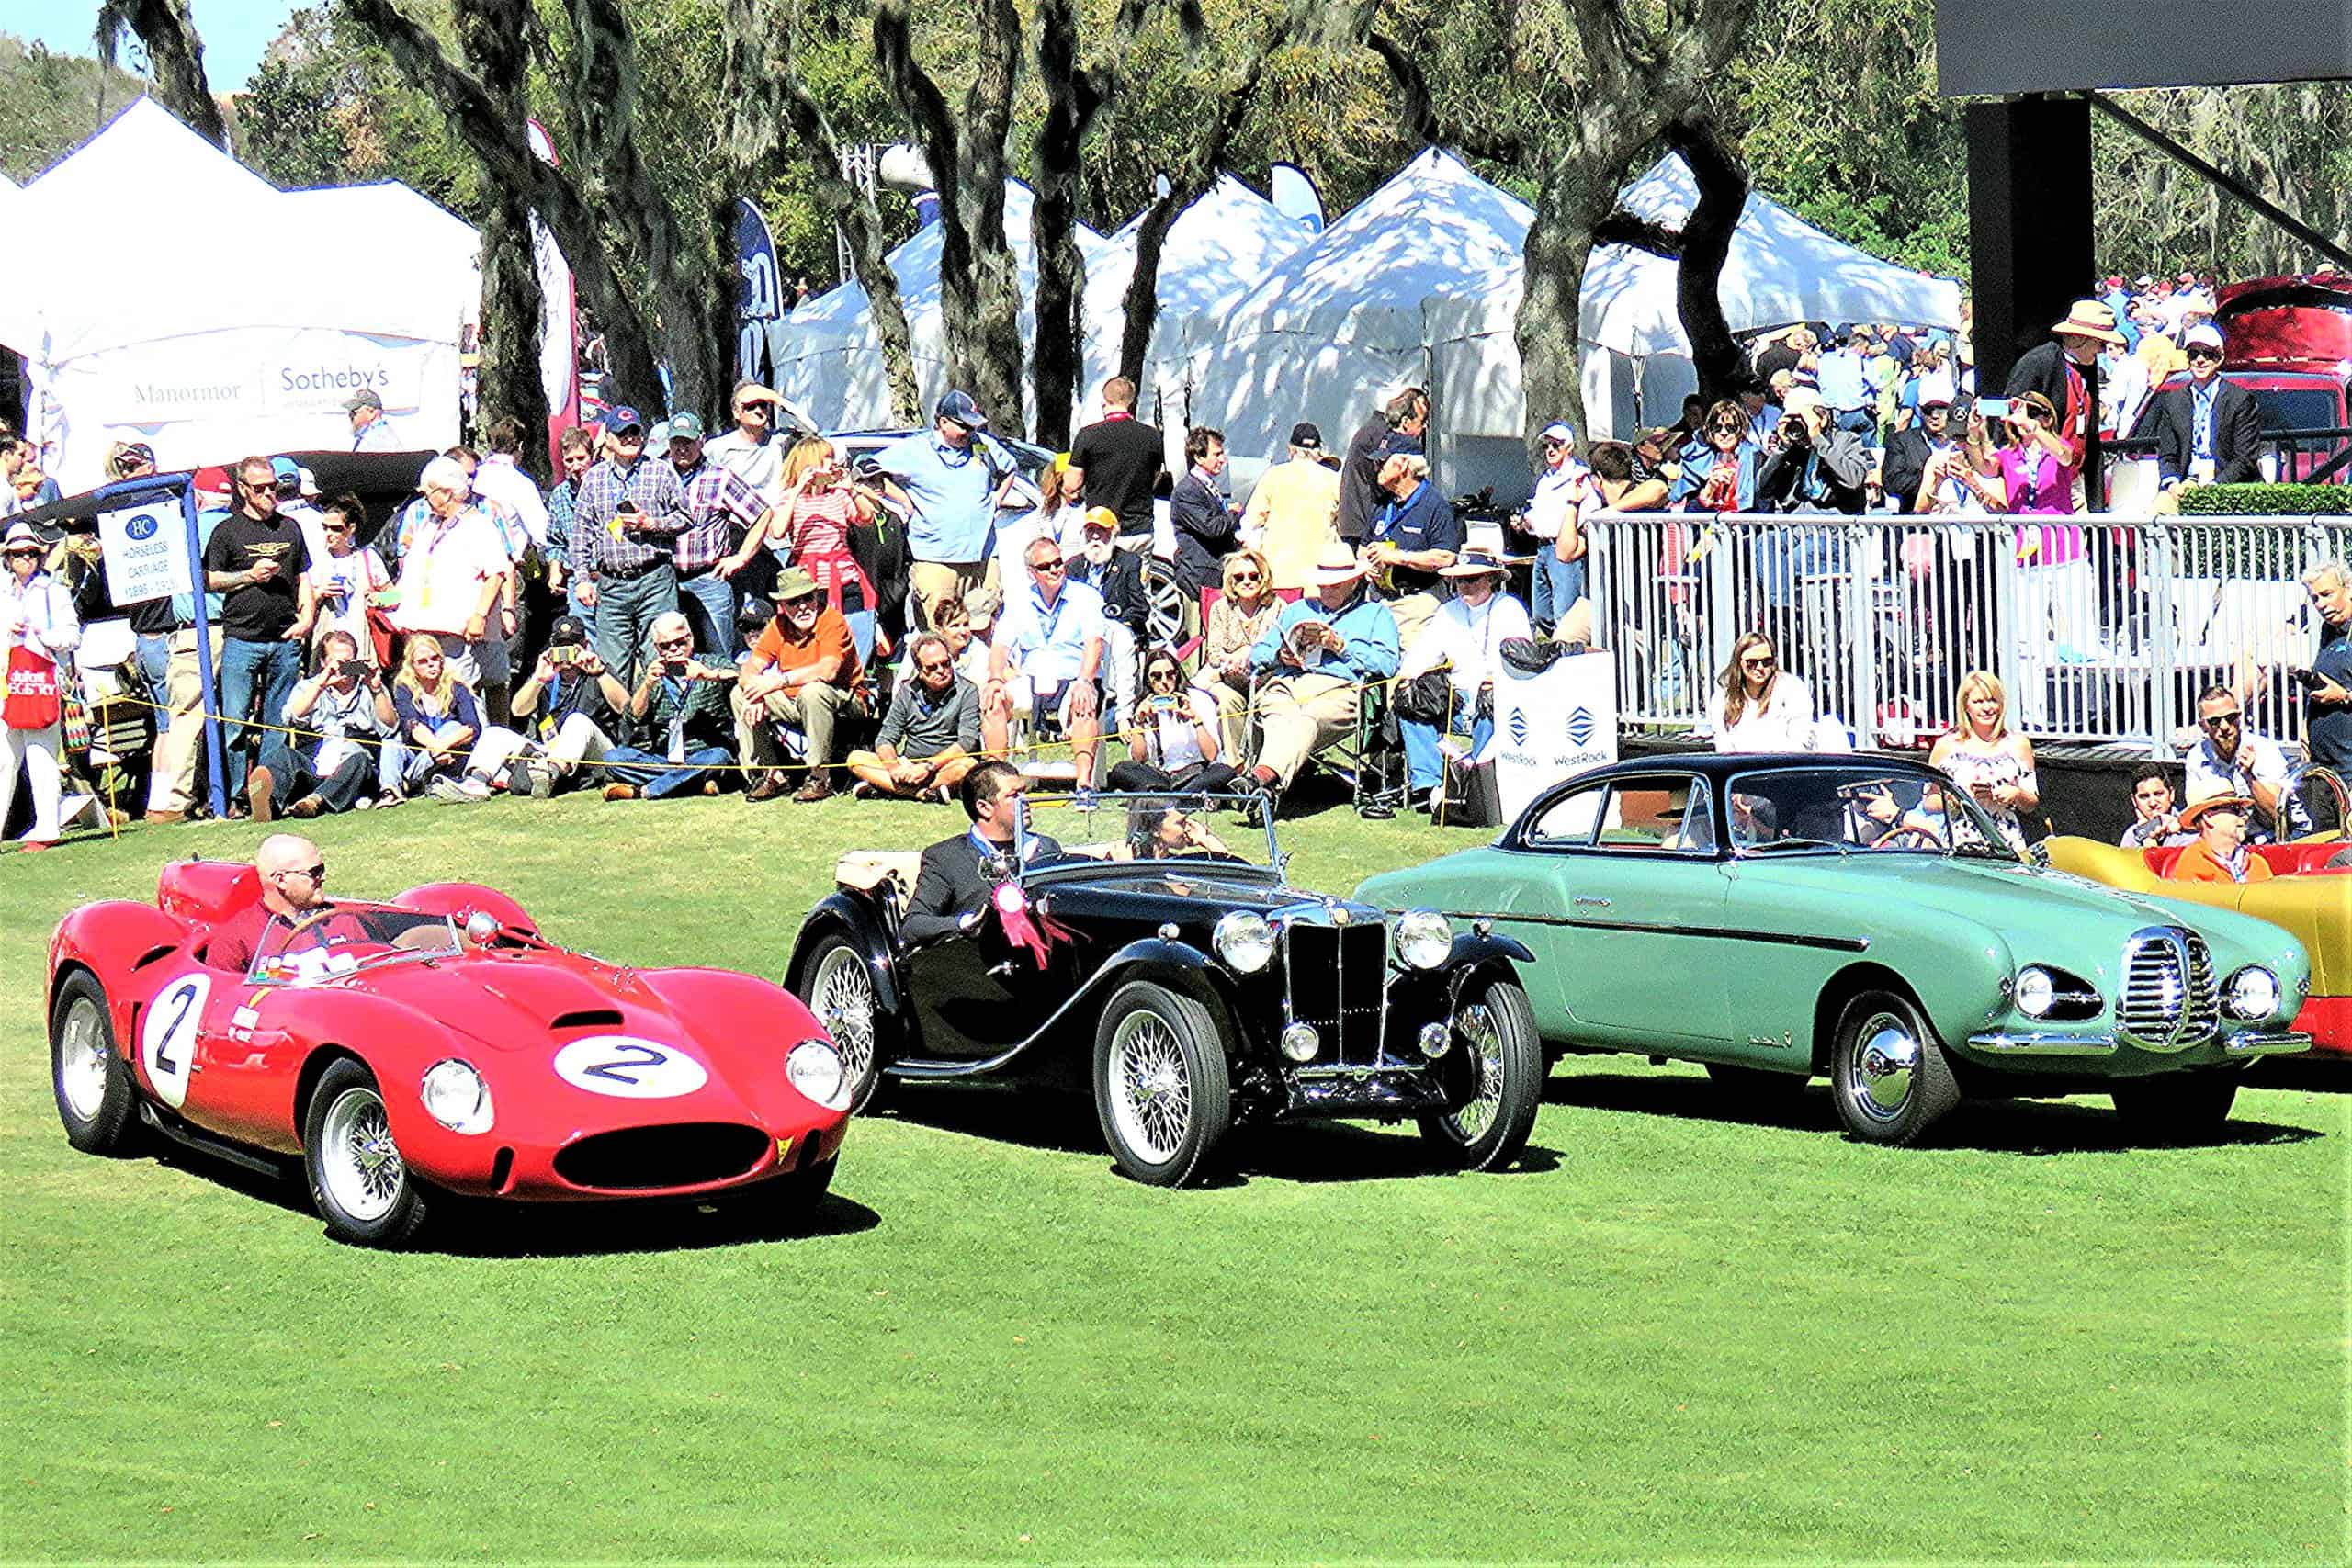 Amelia Island Concours this week, plus other car show news